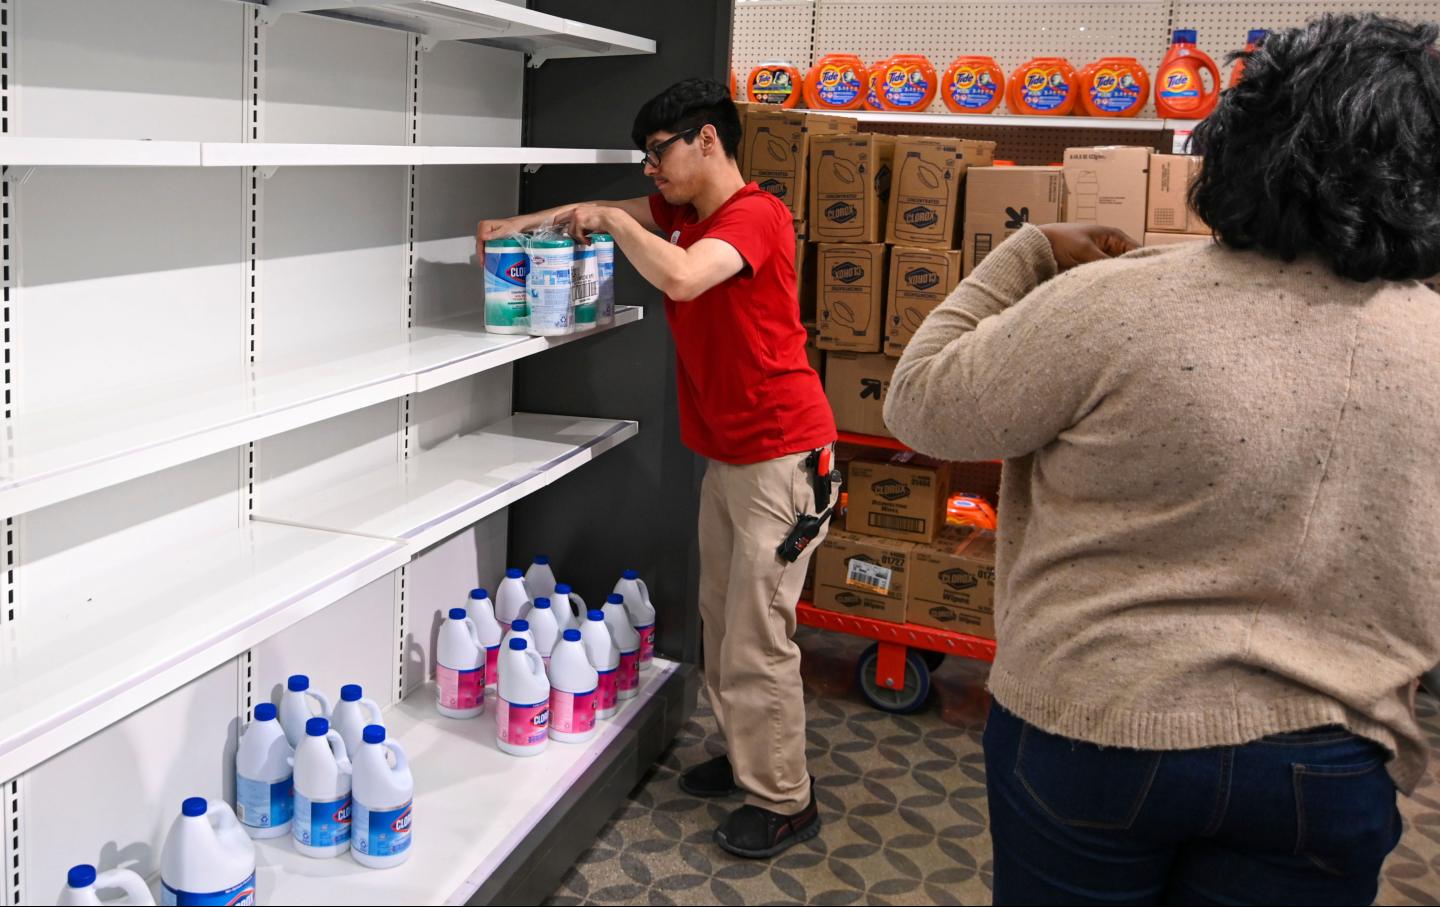 Amid a Pandemic, Target Employees Work in Fear The Nation